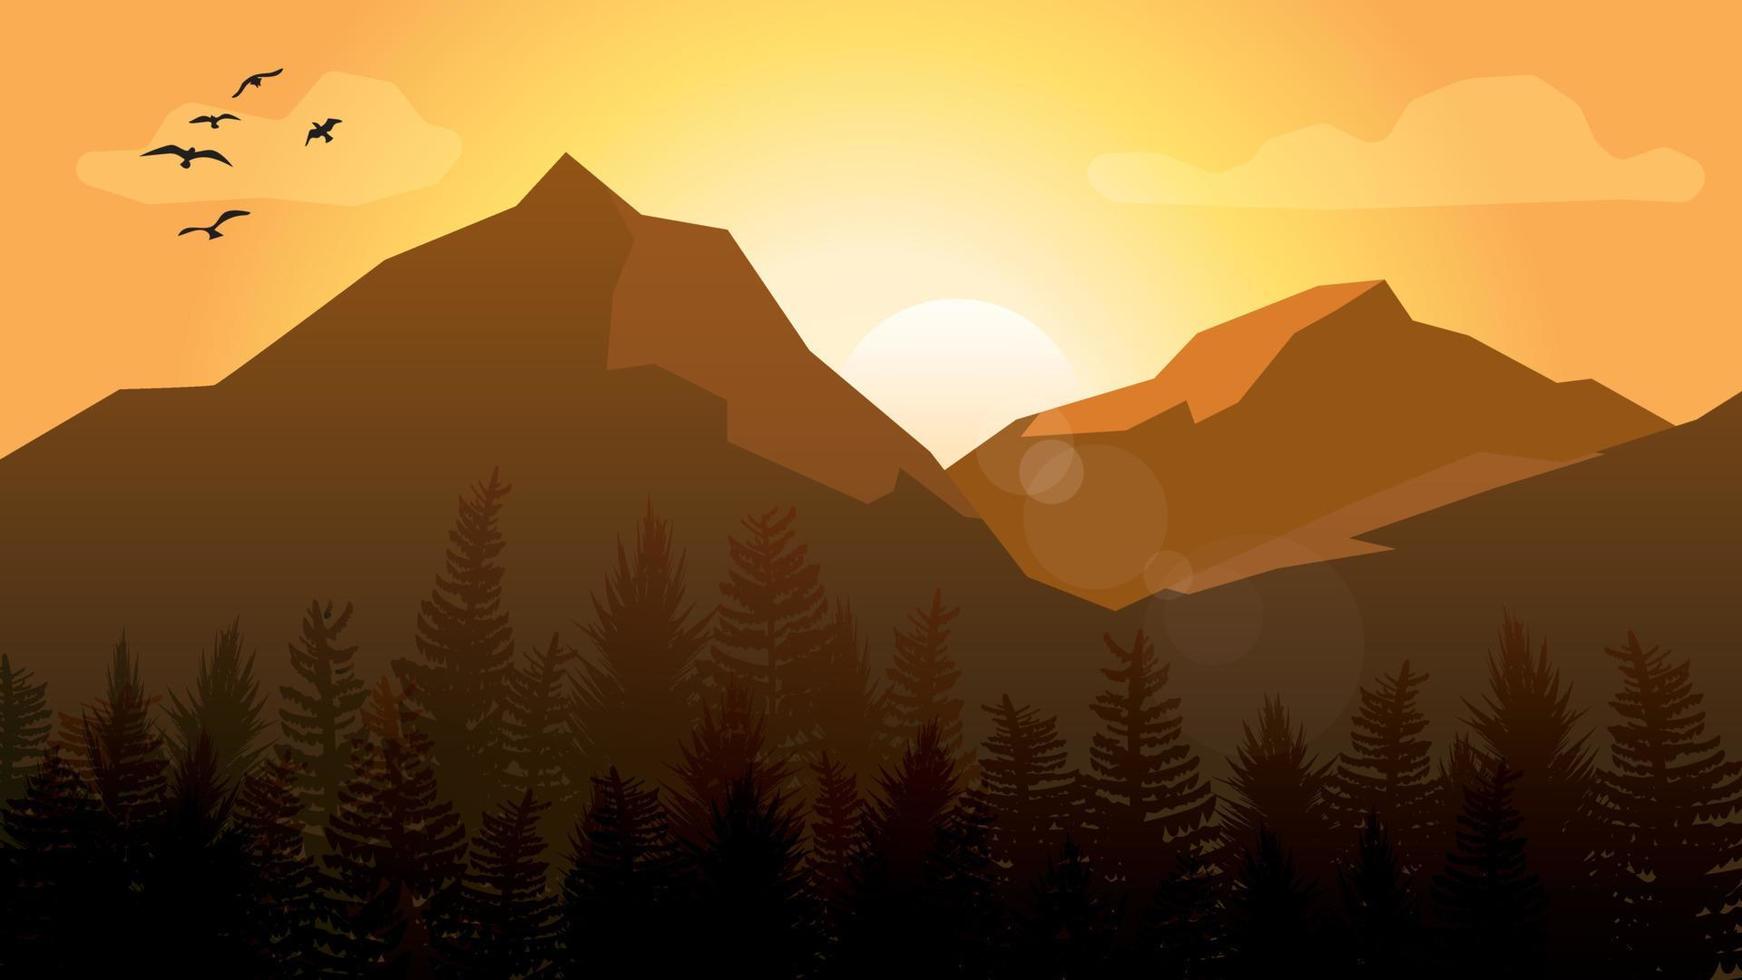 Mountains landscape with silhouettes of trees and birds with sunrise or sunset sky and lens flares. vector